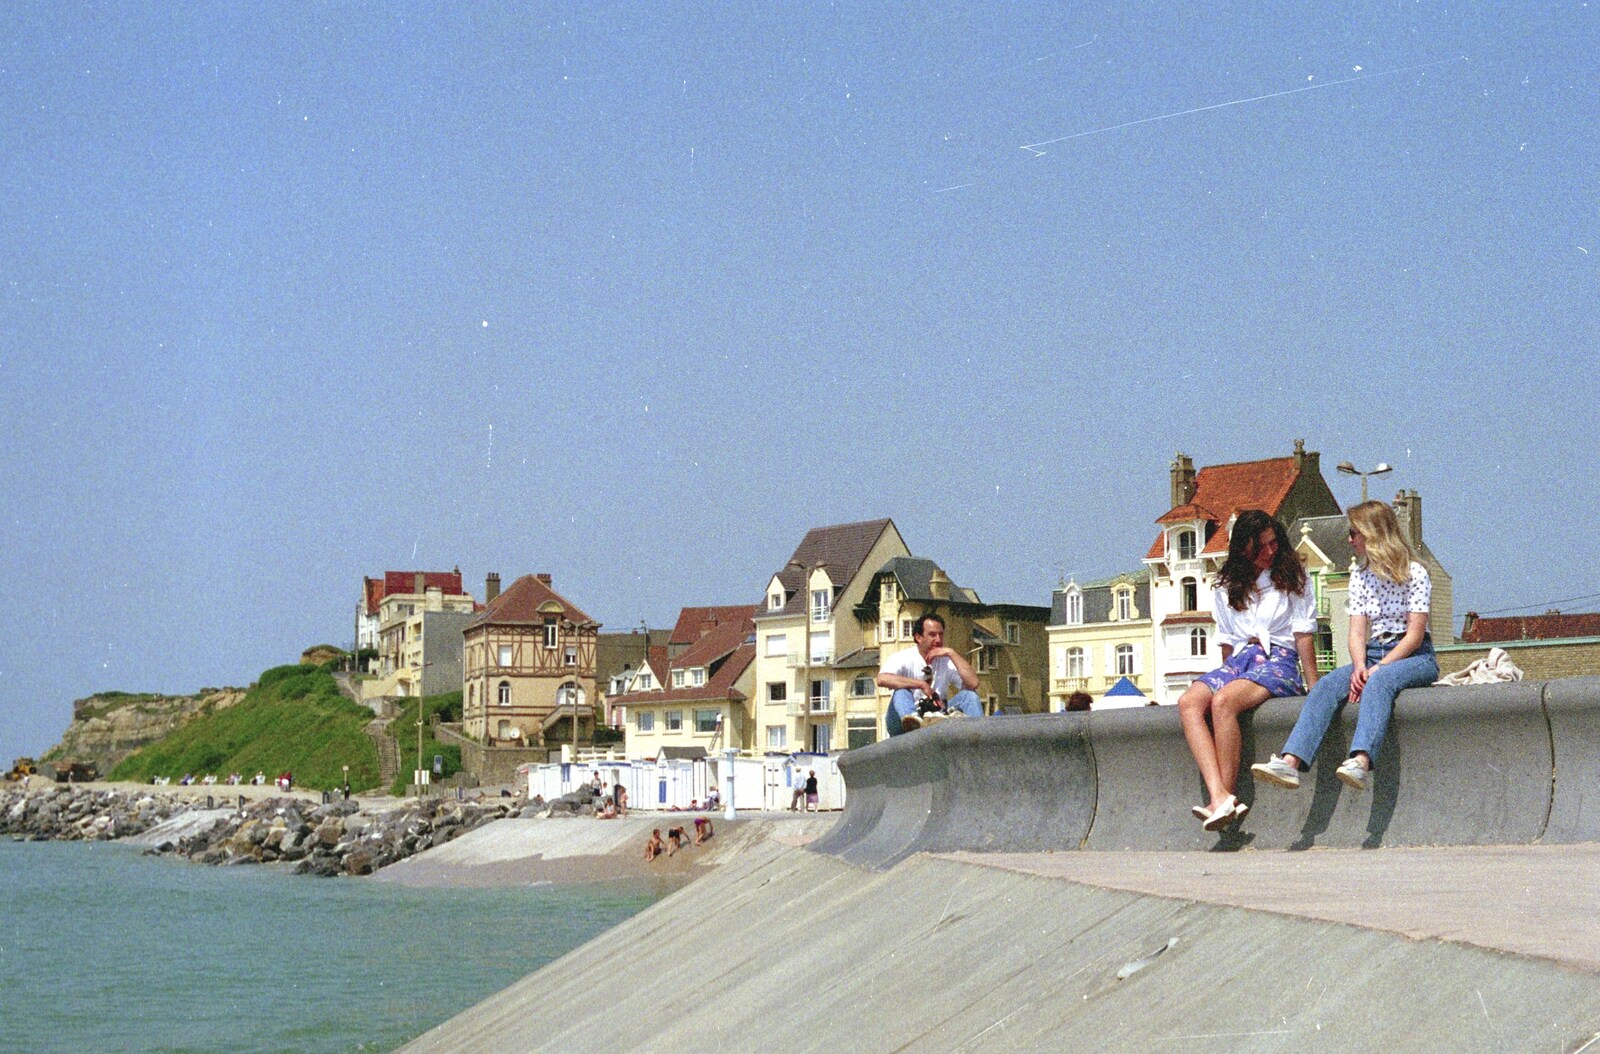 The seafront of Wimmereaux from A Brome Swan Trip to Wimereux, France - 20th June 1996